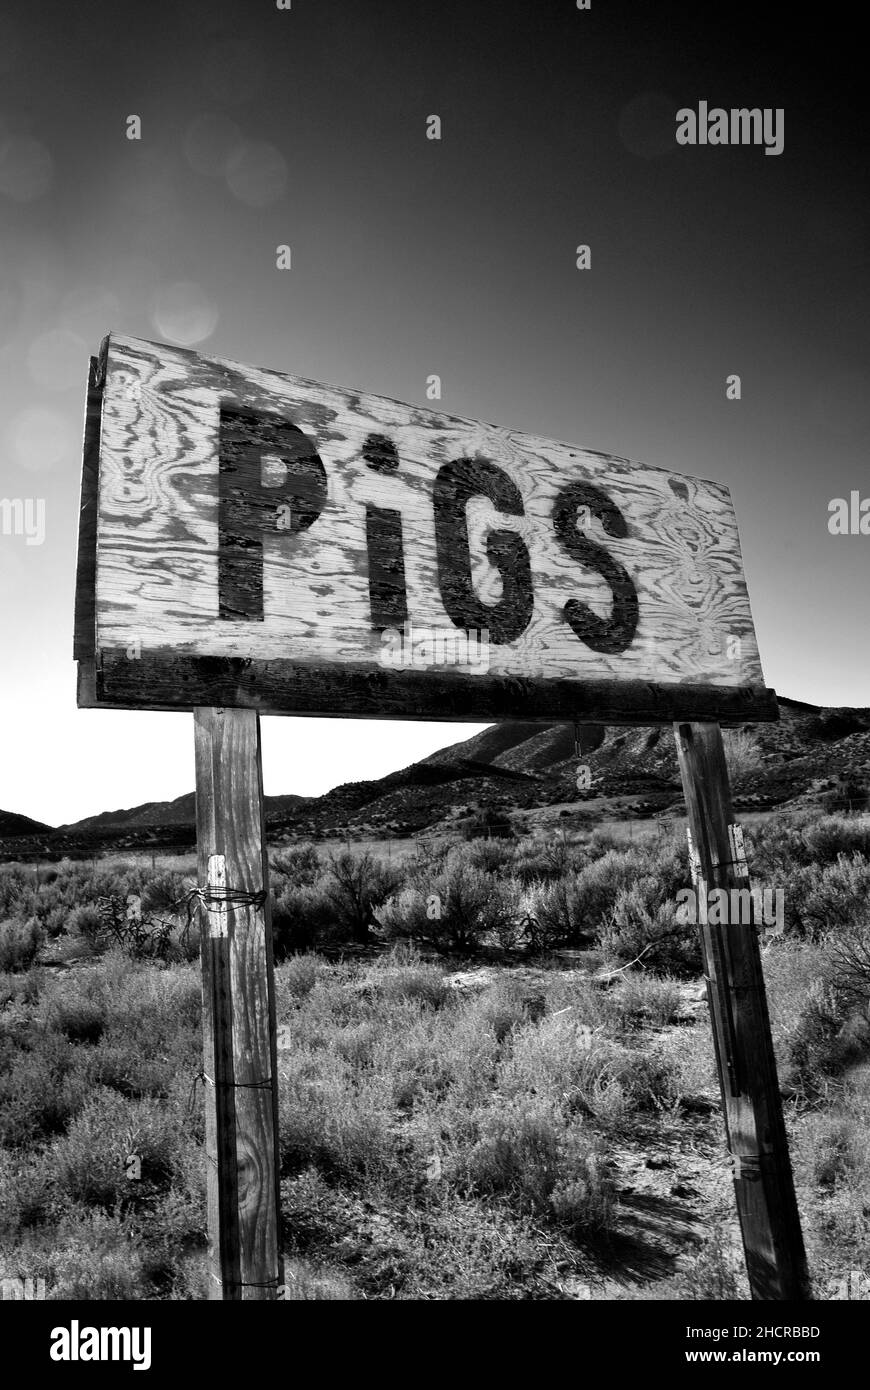 A homemade roadside sign advertises pigs for sale near rural Ojo Caliente, New Mexico Stock Photo